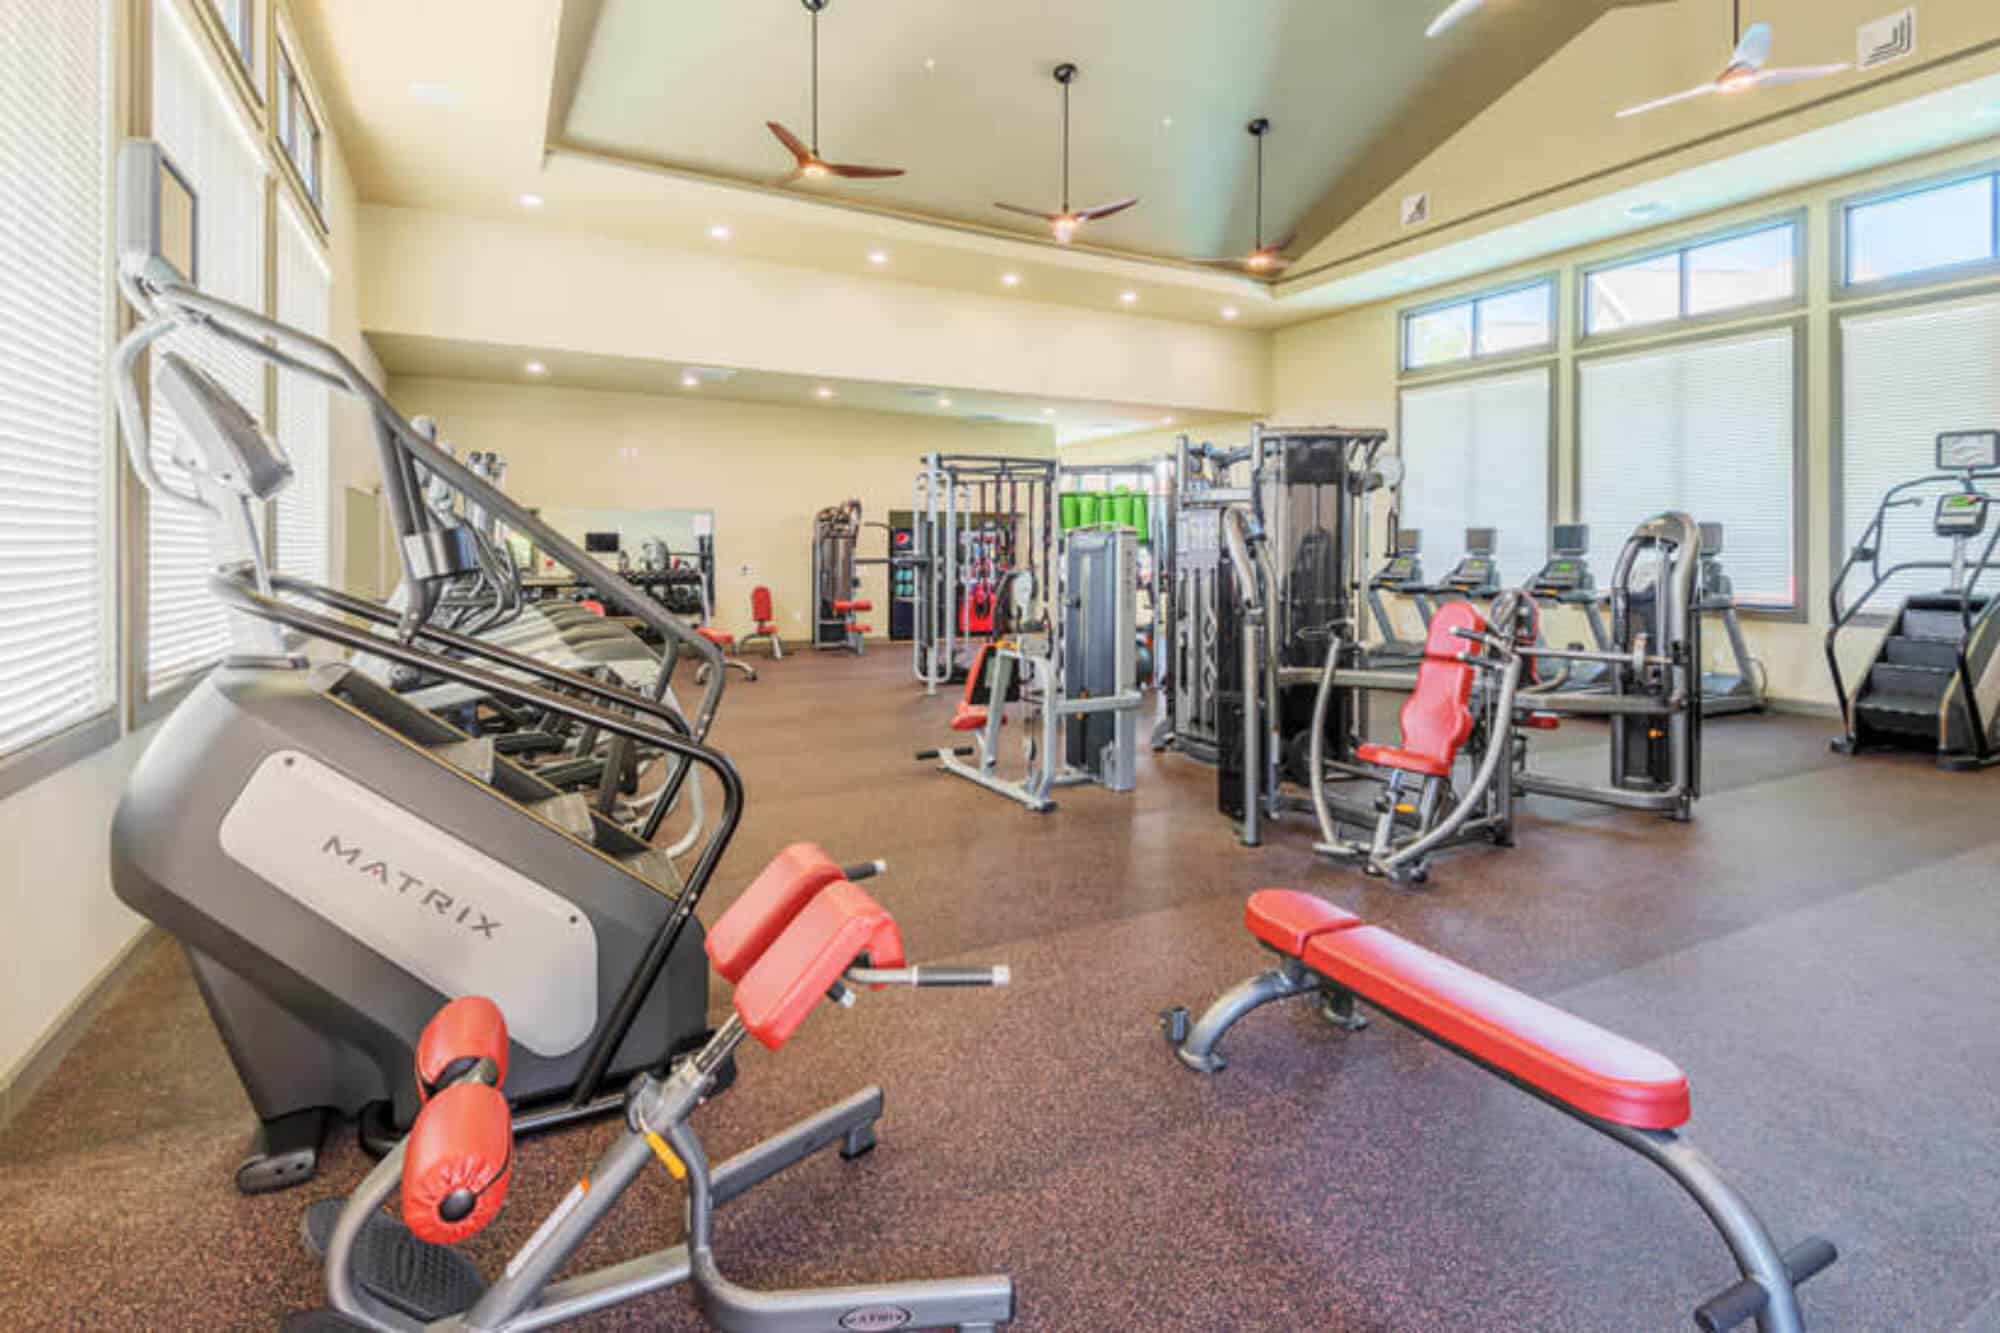 millenium one off campus apartments near the university of north carolina charlotte unc charlotte uncc professional fitness center with xlab crossfit